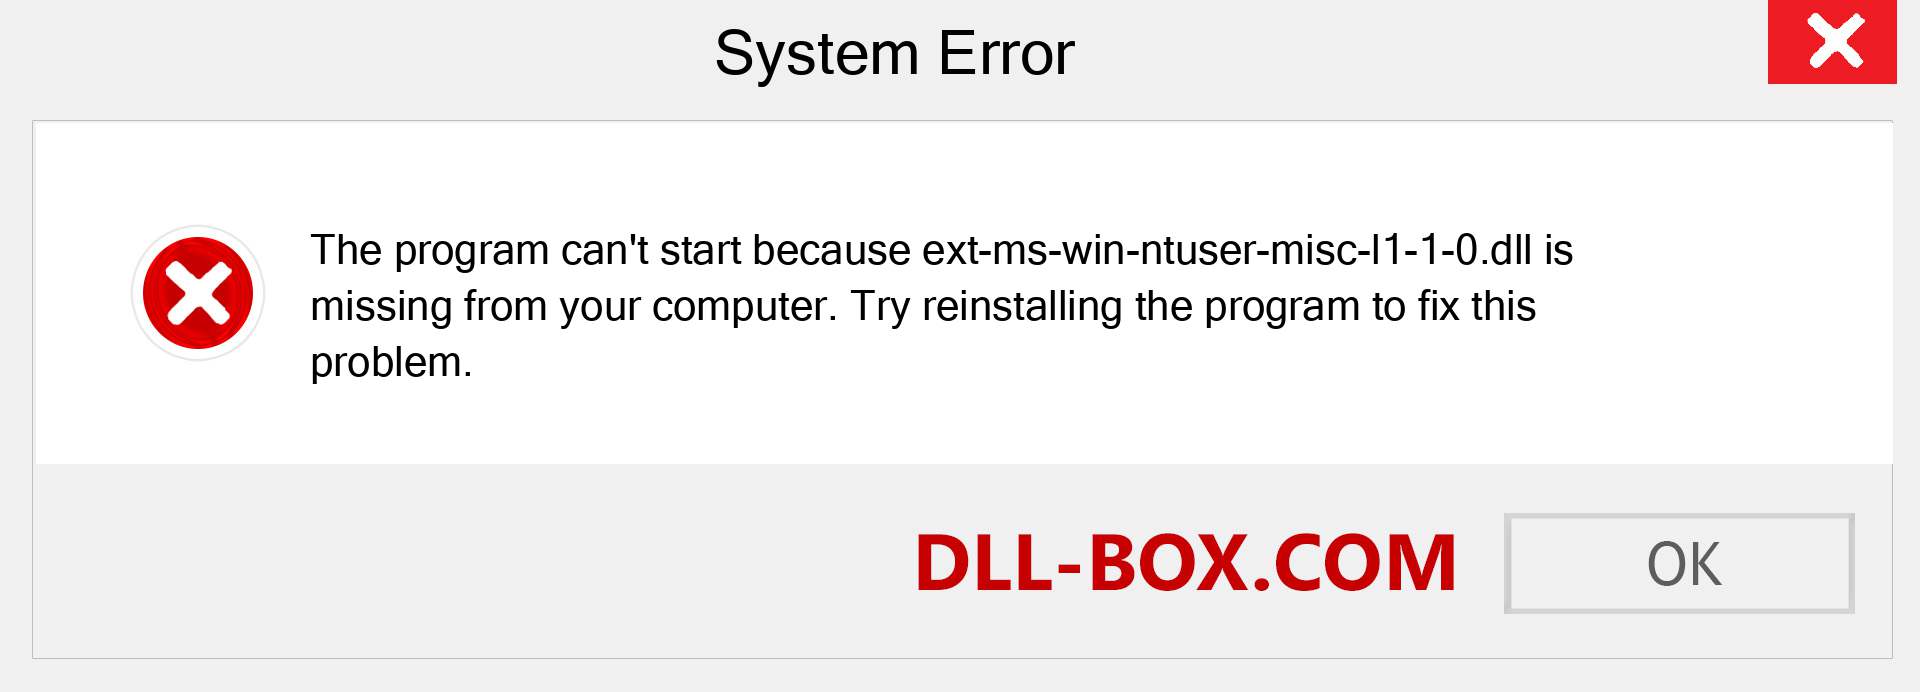  ext-ms-win-ntuser-misc-l1-1-0.dll file is missing?. Download for Windows 7, 8, 10 - Fix  ext-ms-win-ntuser-misc-l1-1-0 dll Missing Error on Windows, photos, images